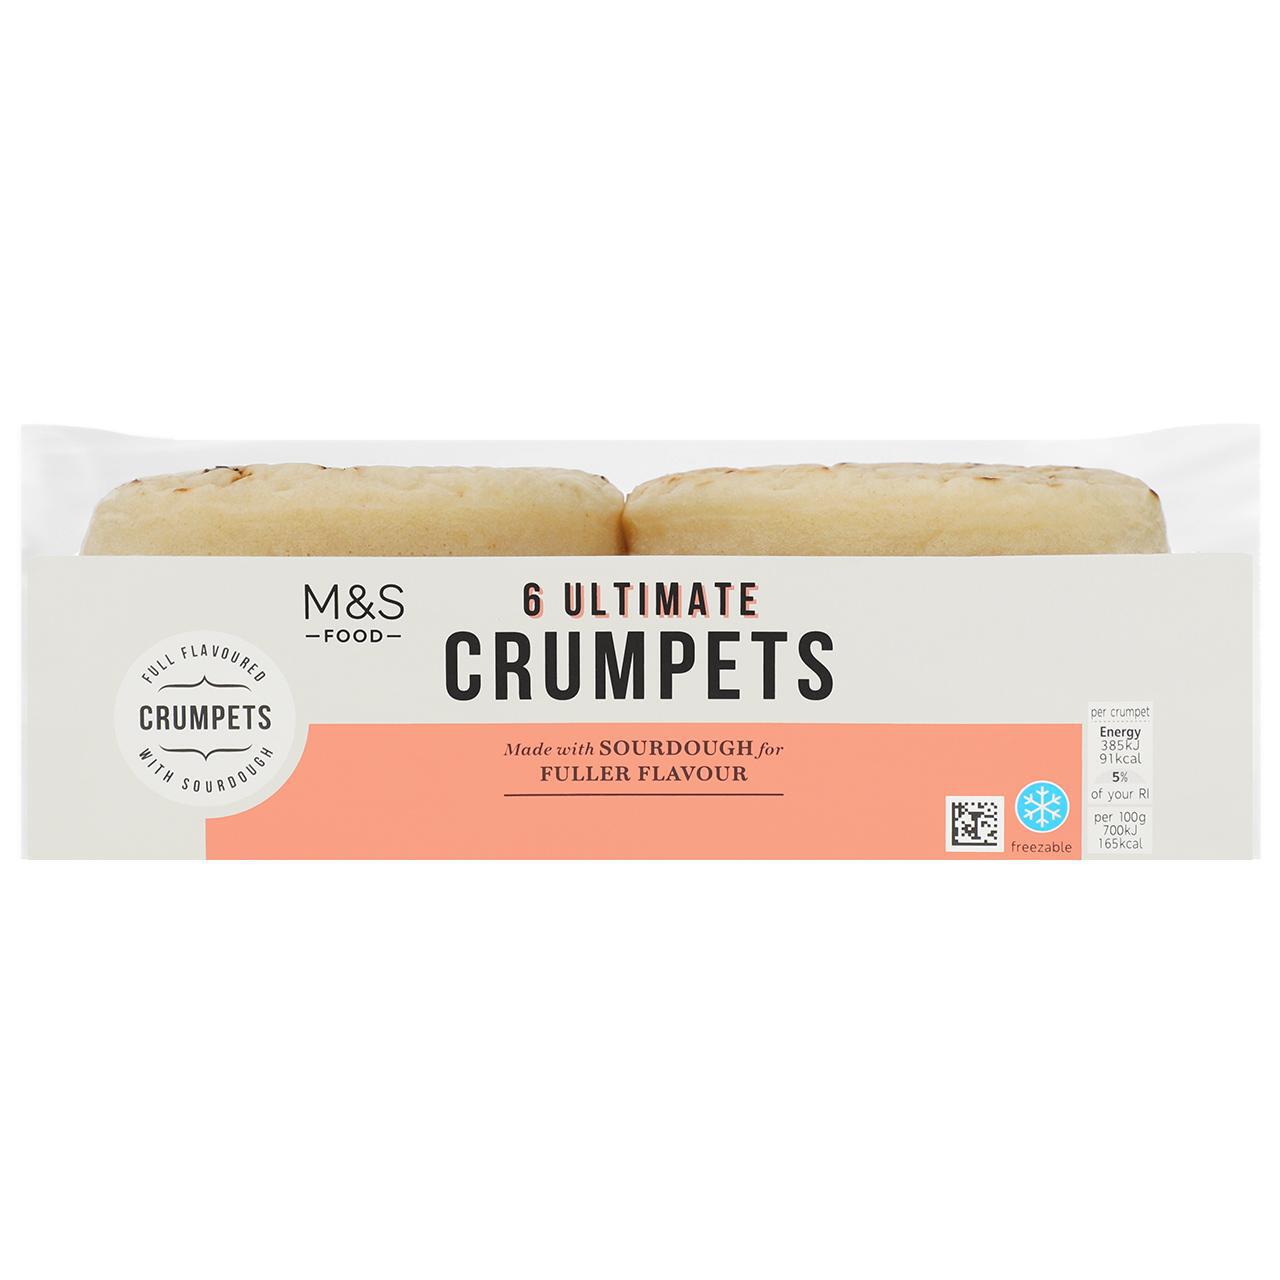 M&S Ultimate Crumpets 6 per pack